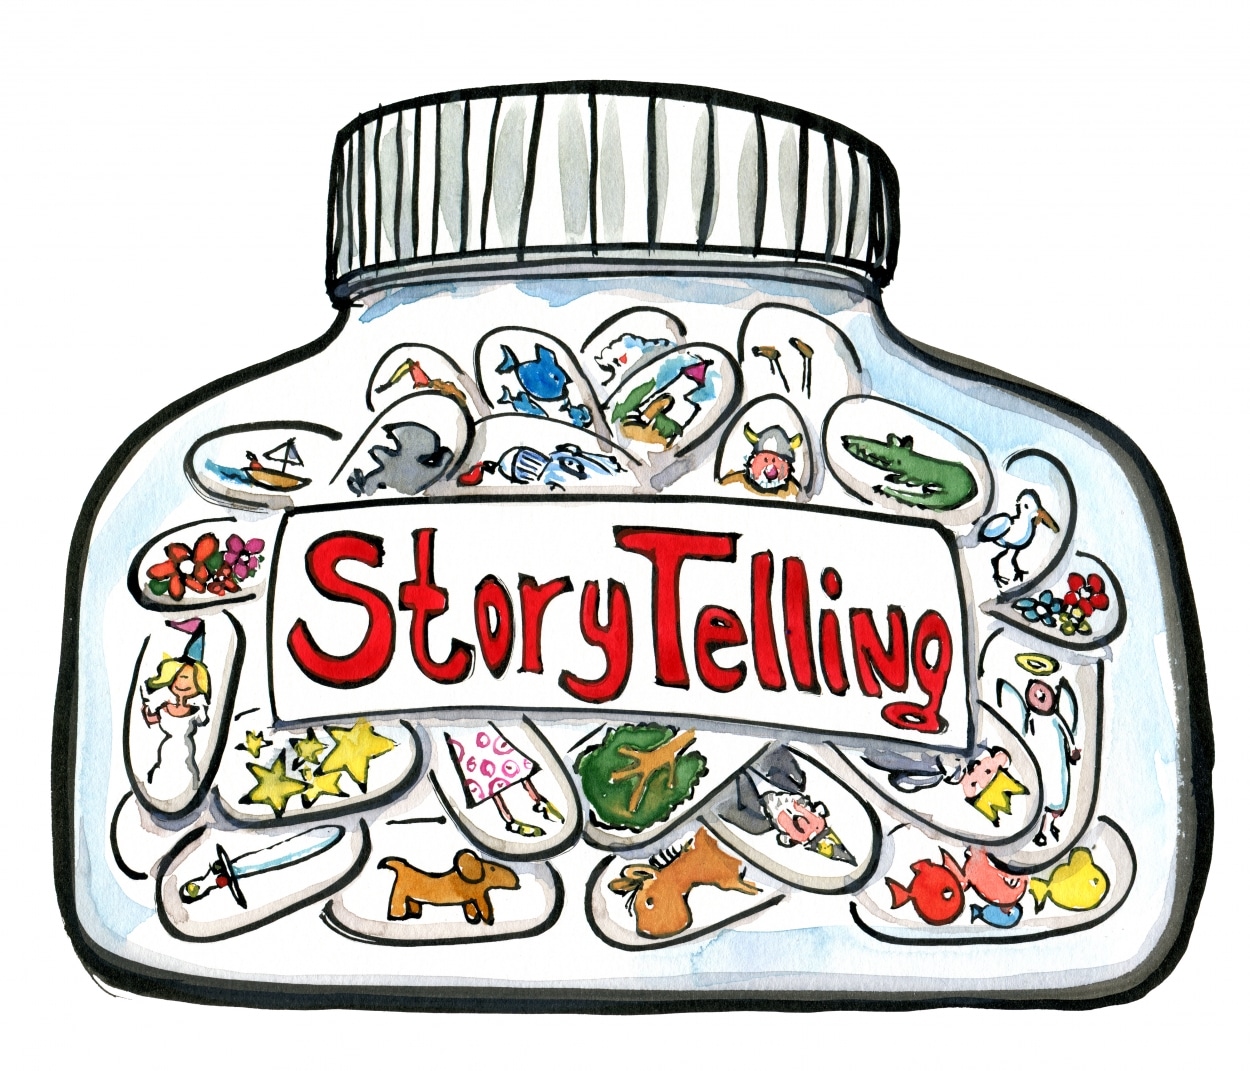 WHY MARKETING IS NOW ABOUT TELLING A STORY